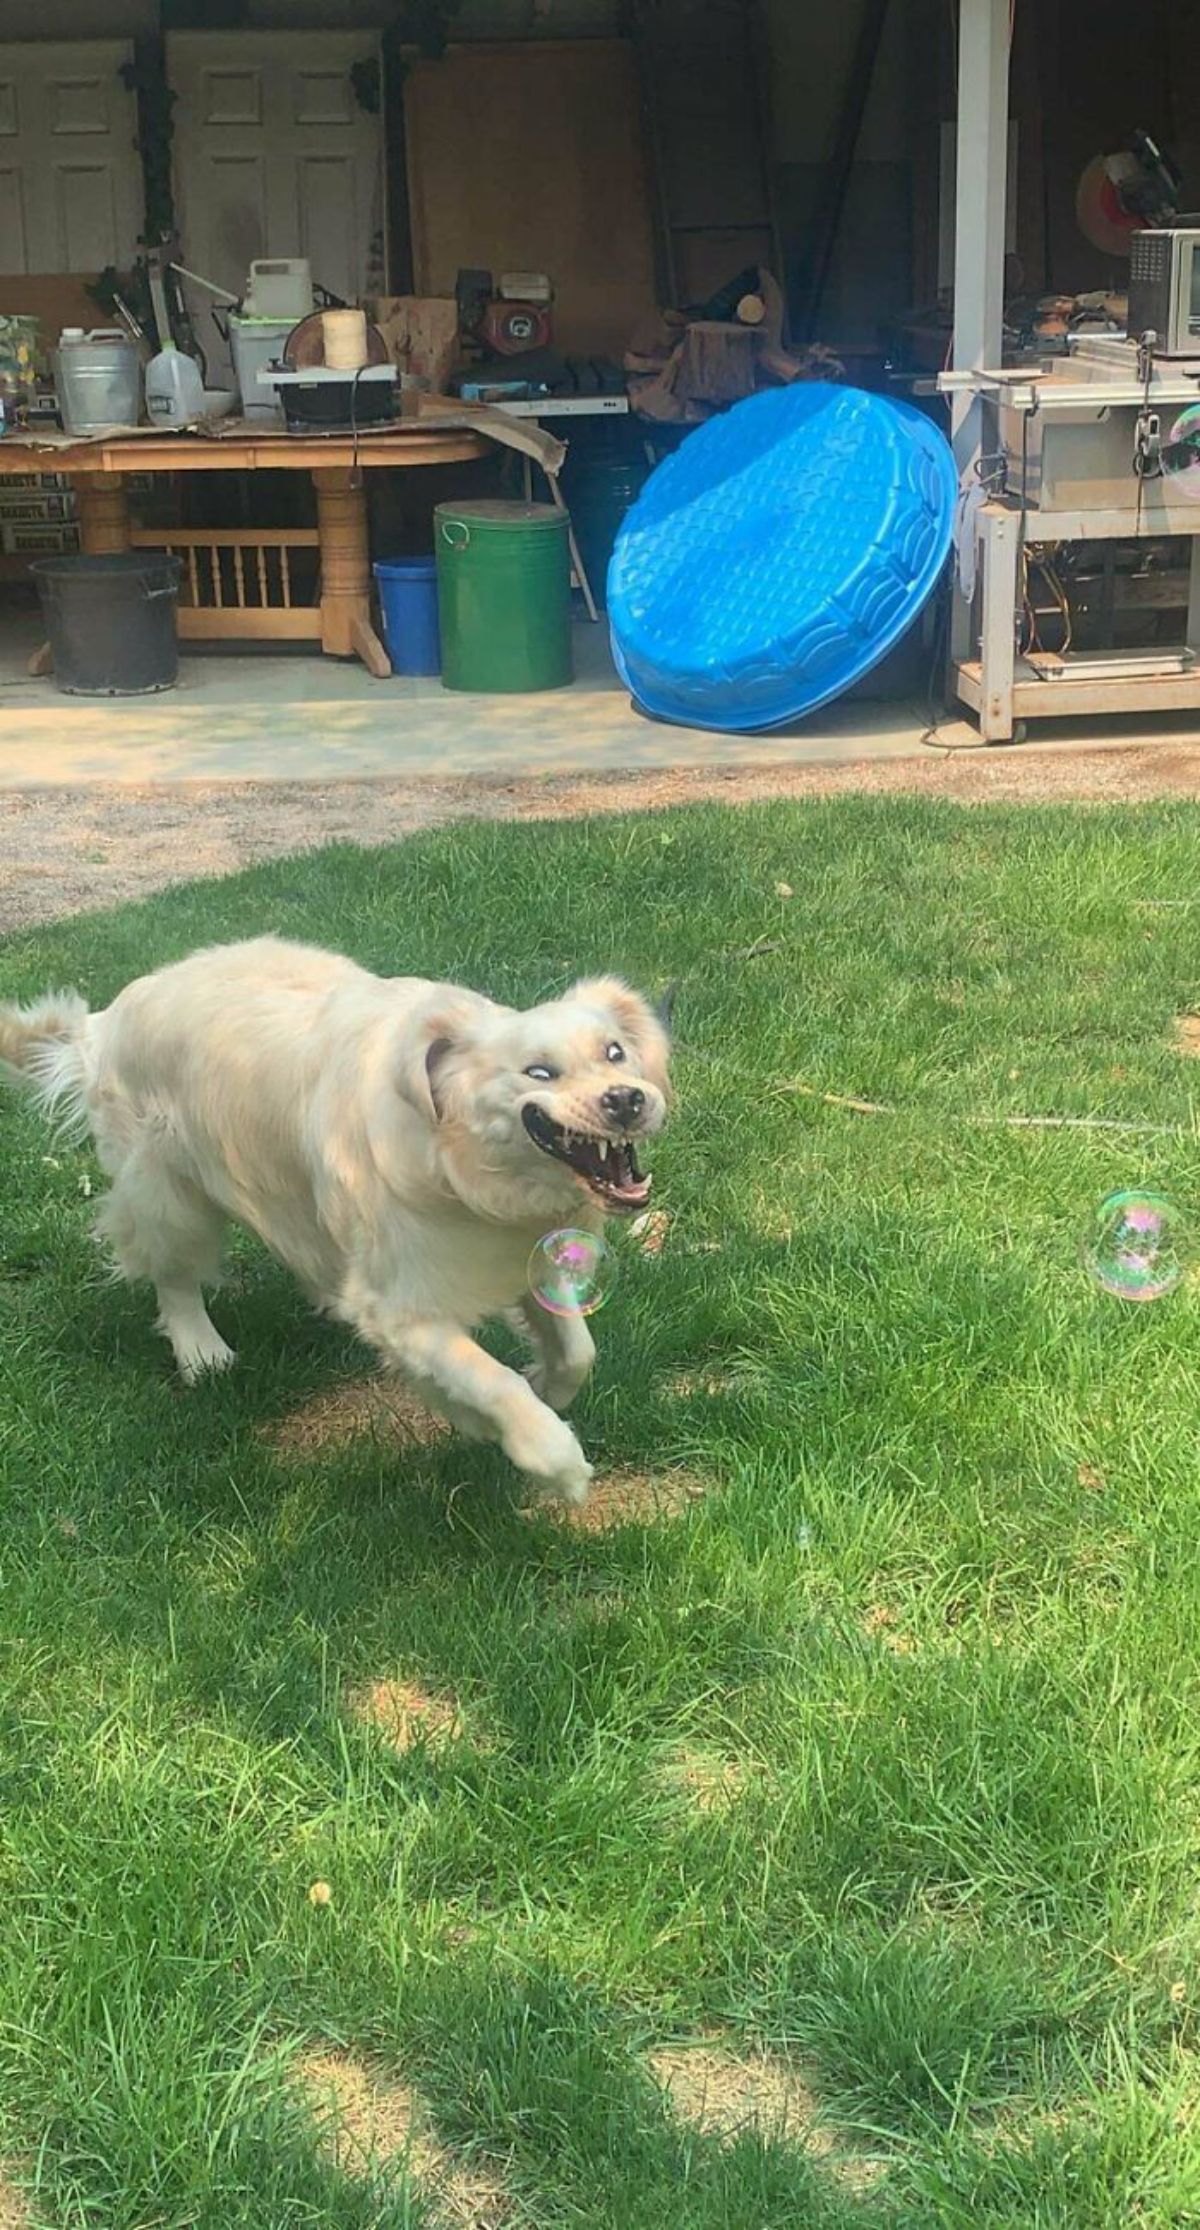 golden retriever running on grass next to a soap bubble with the jowls moved up showing the teeth